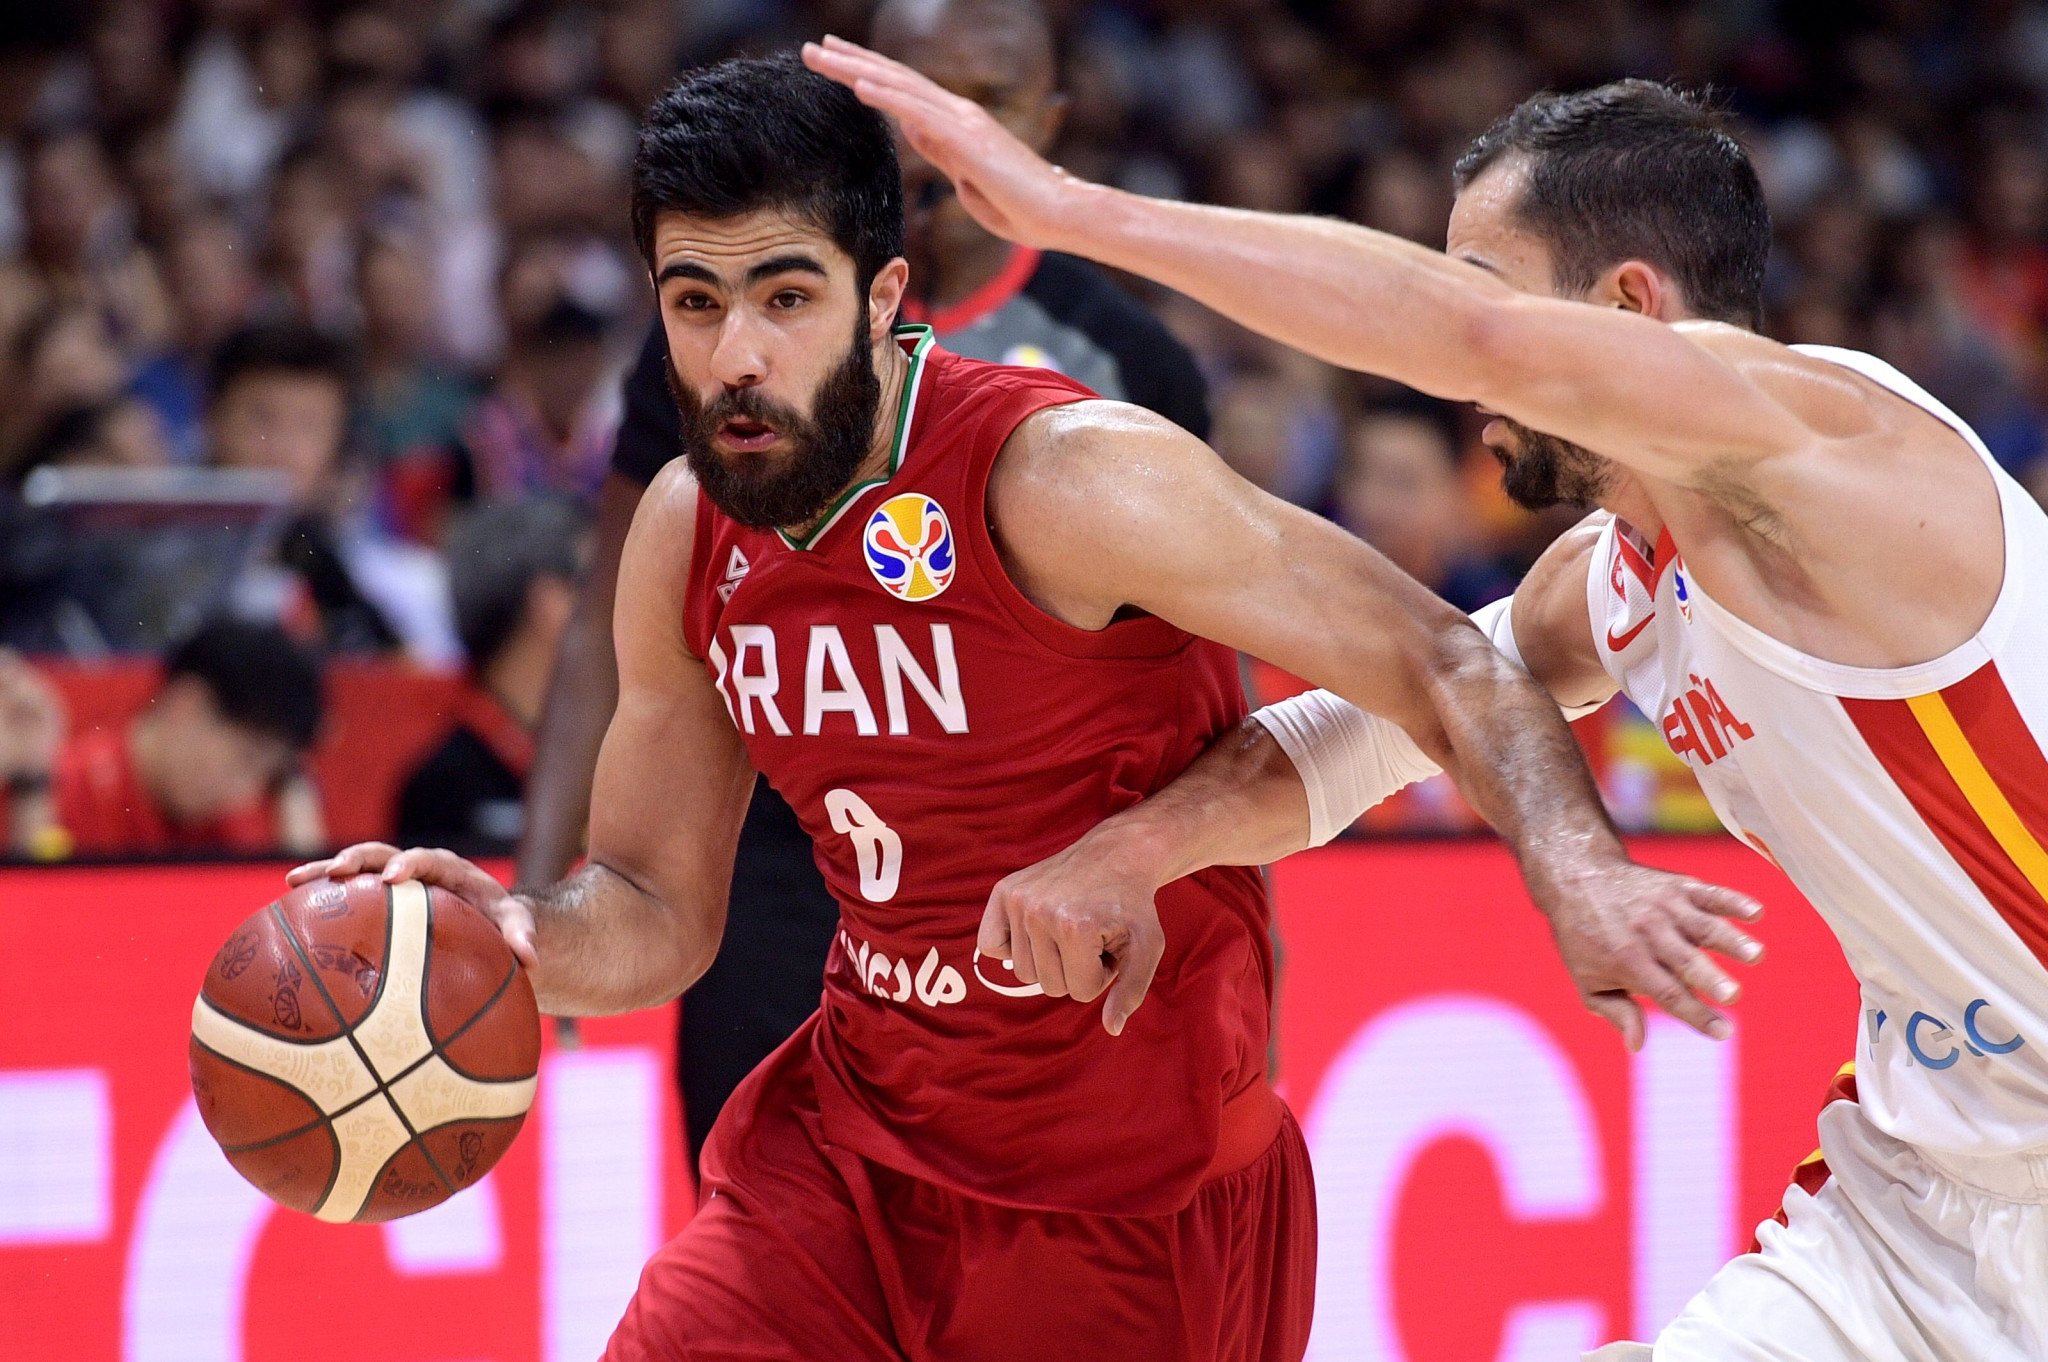 Iran qualified for Tokyo 2020 after being the best ranked Asian team at the FIBA World Cup ©Getty Images